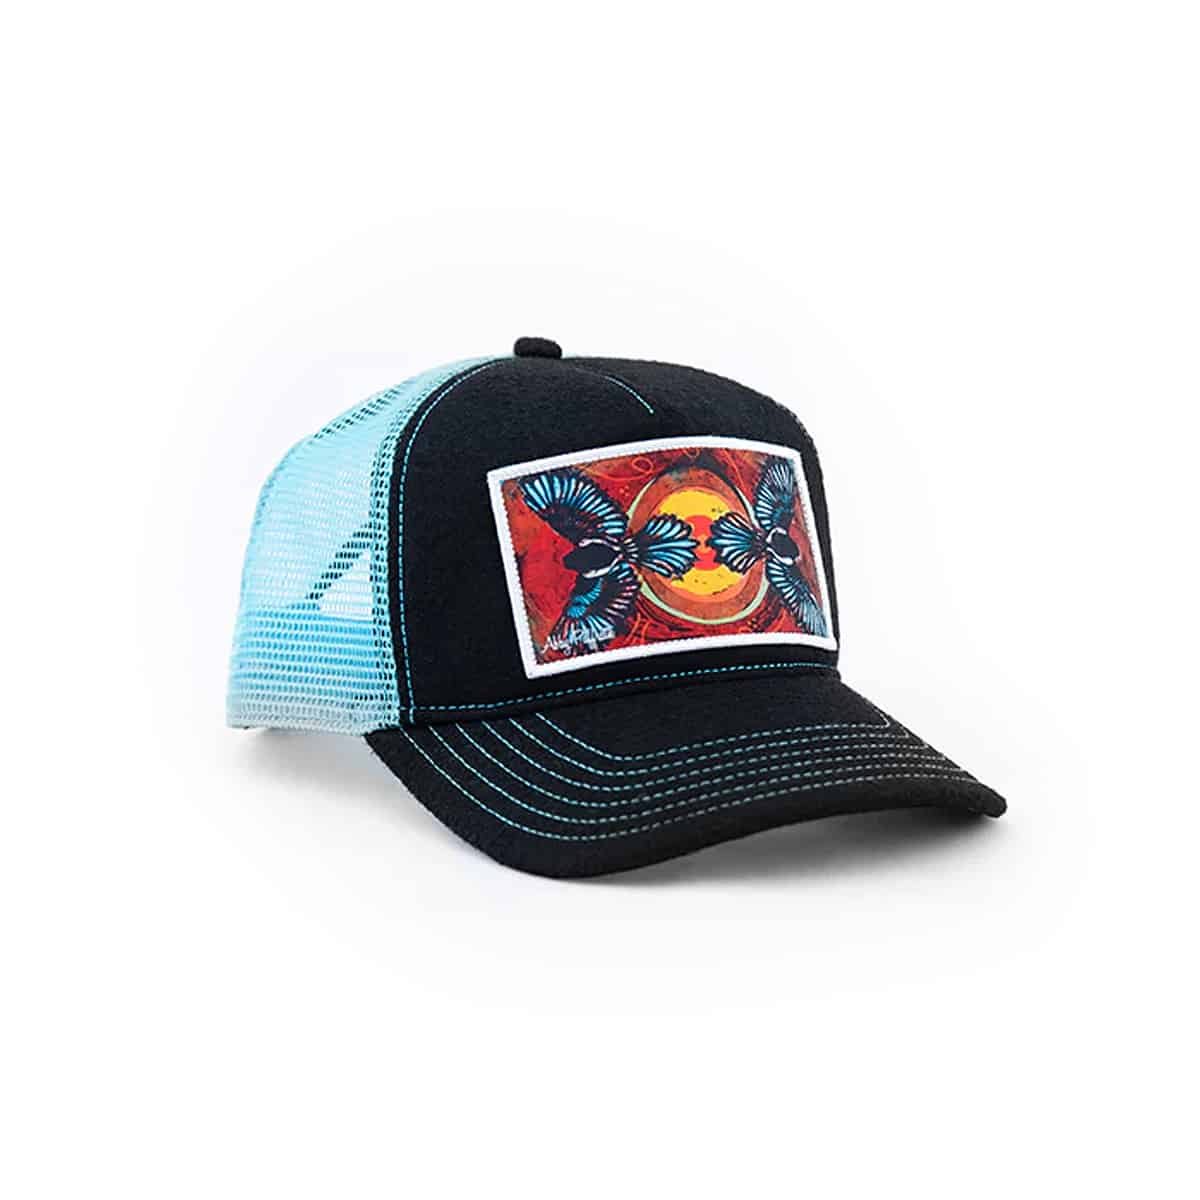 850029265214 art 4 all abby paffrath magpies trucker hat three quarter front